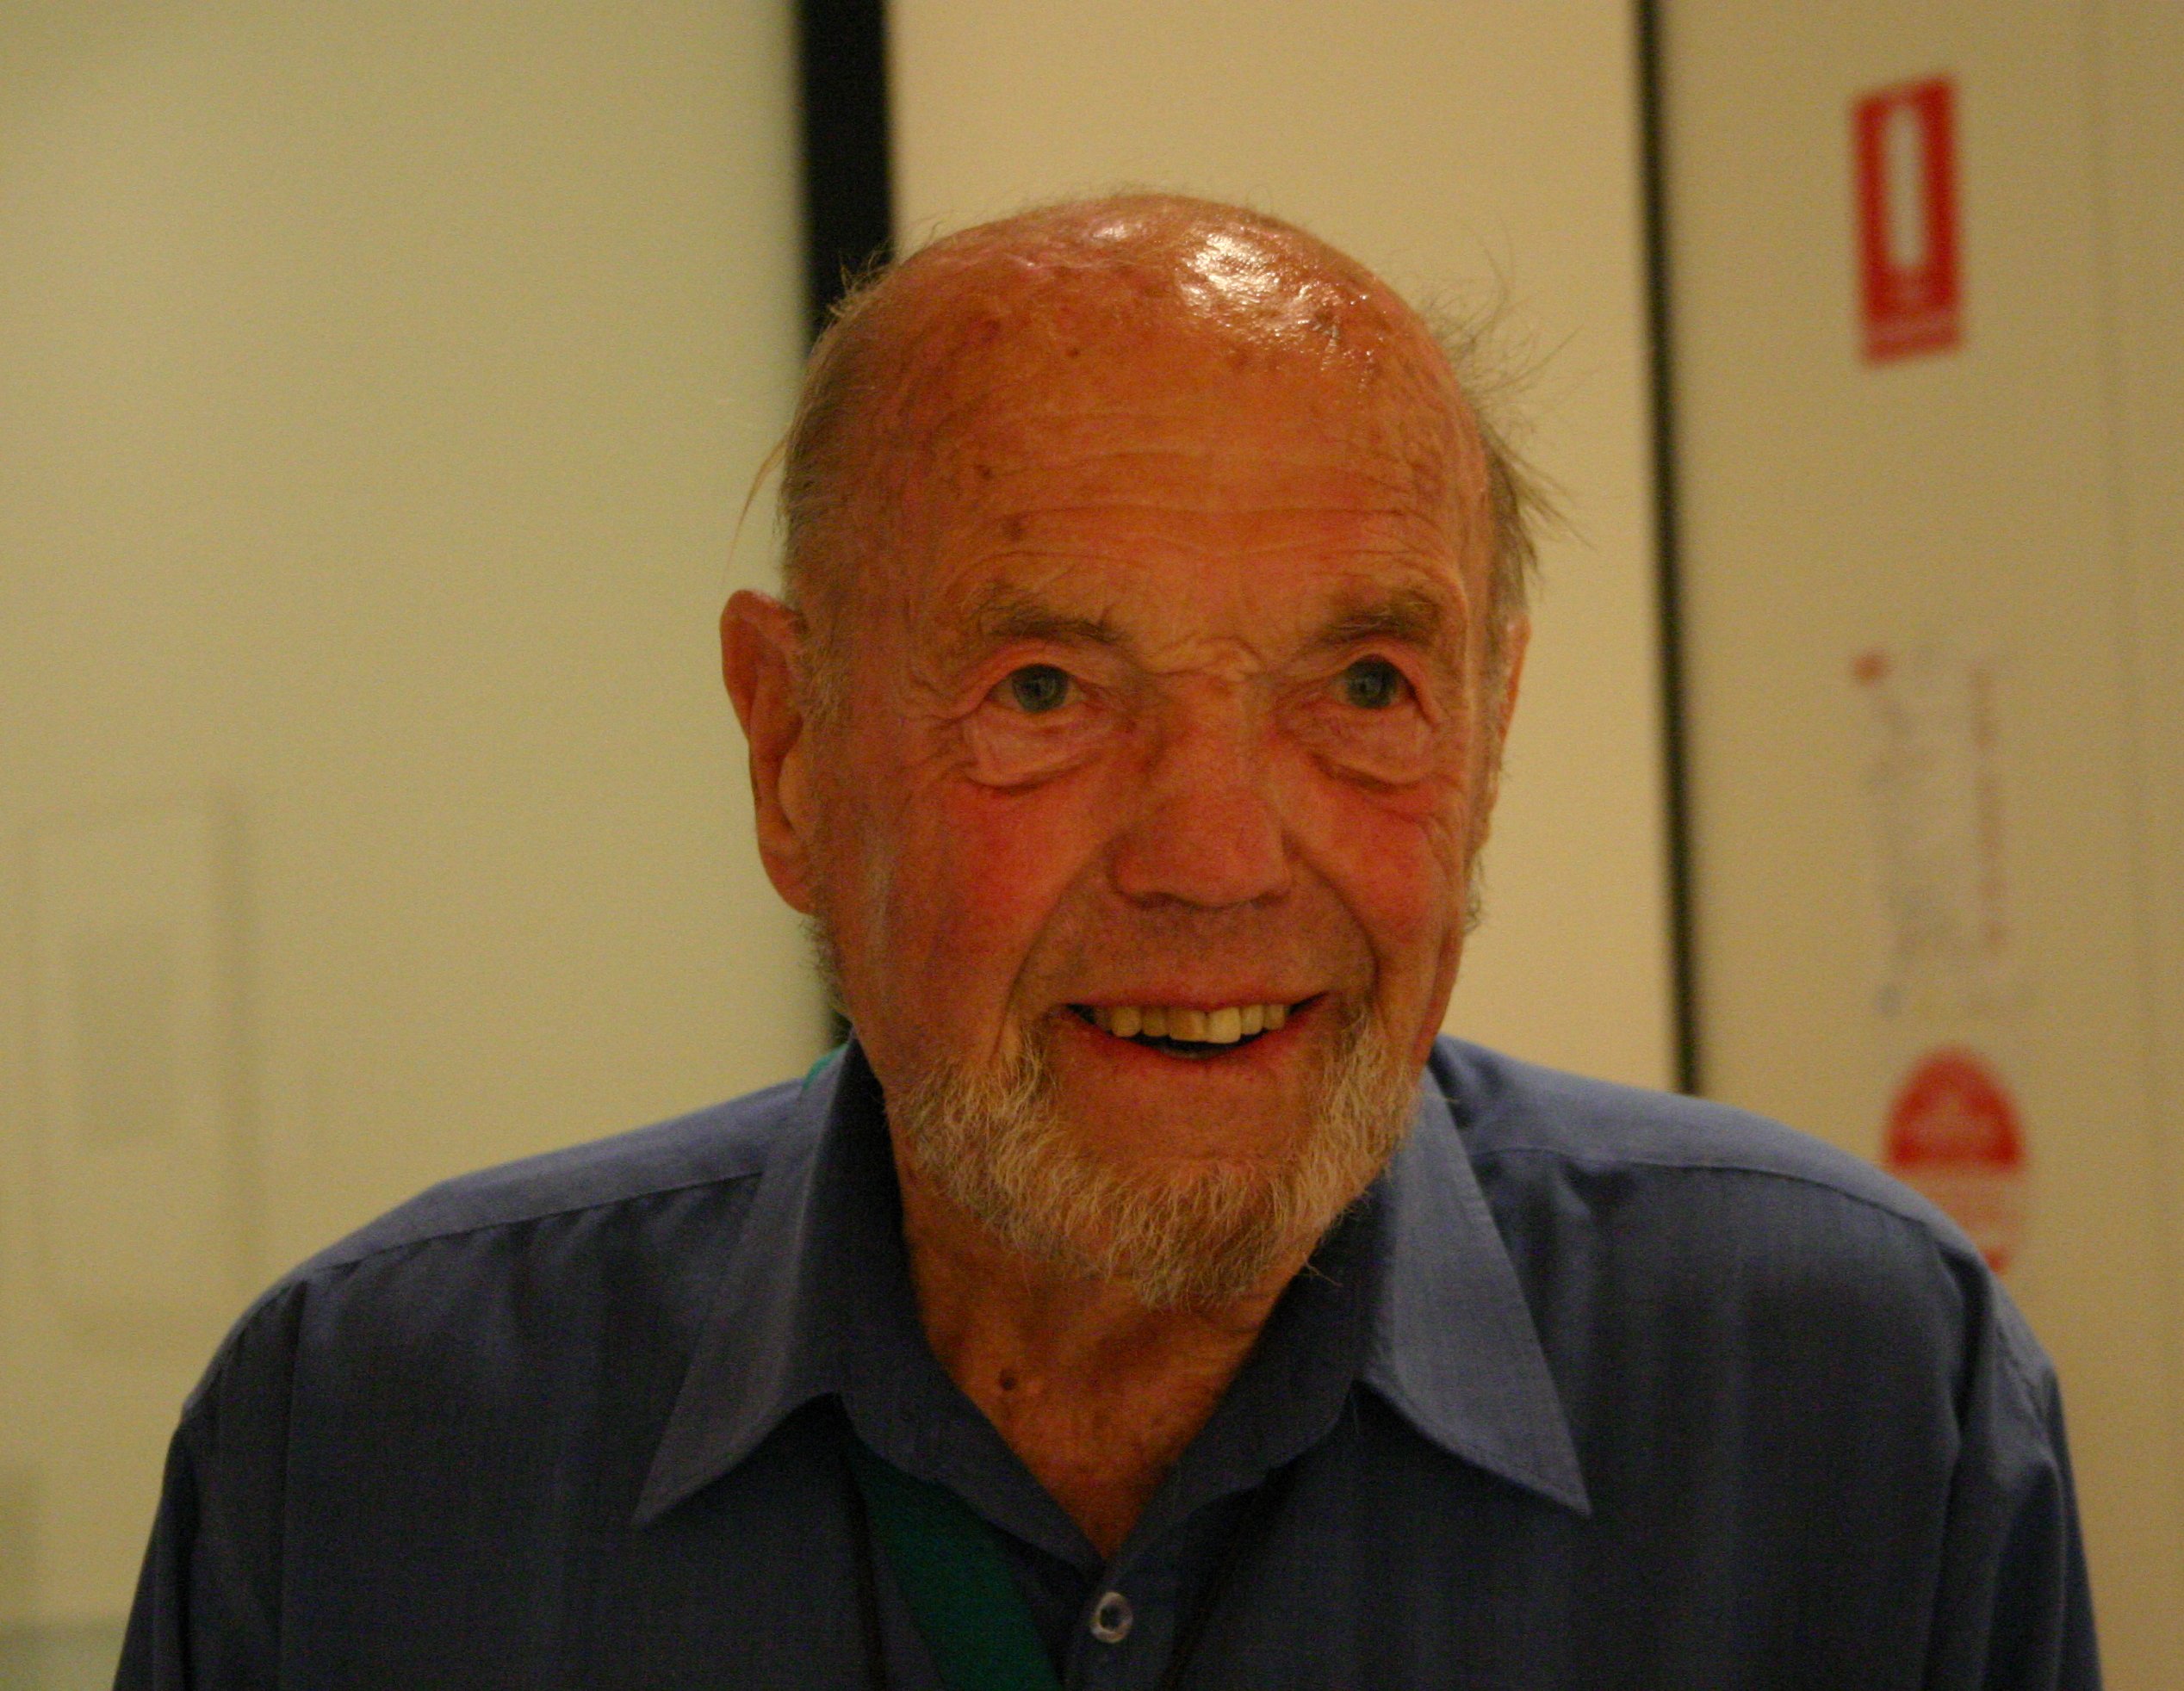 Image of Wolfgang Sievers from Wikidata